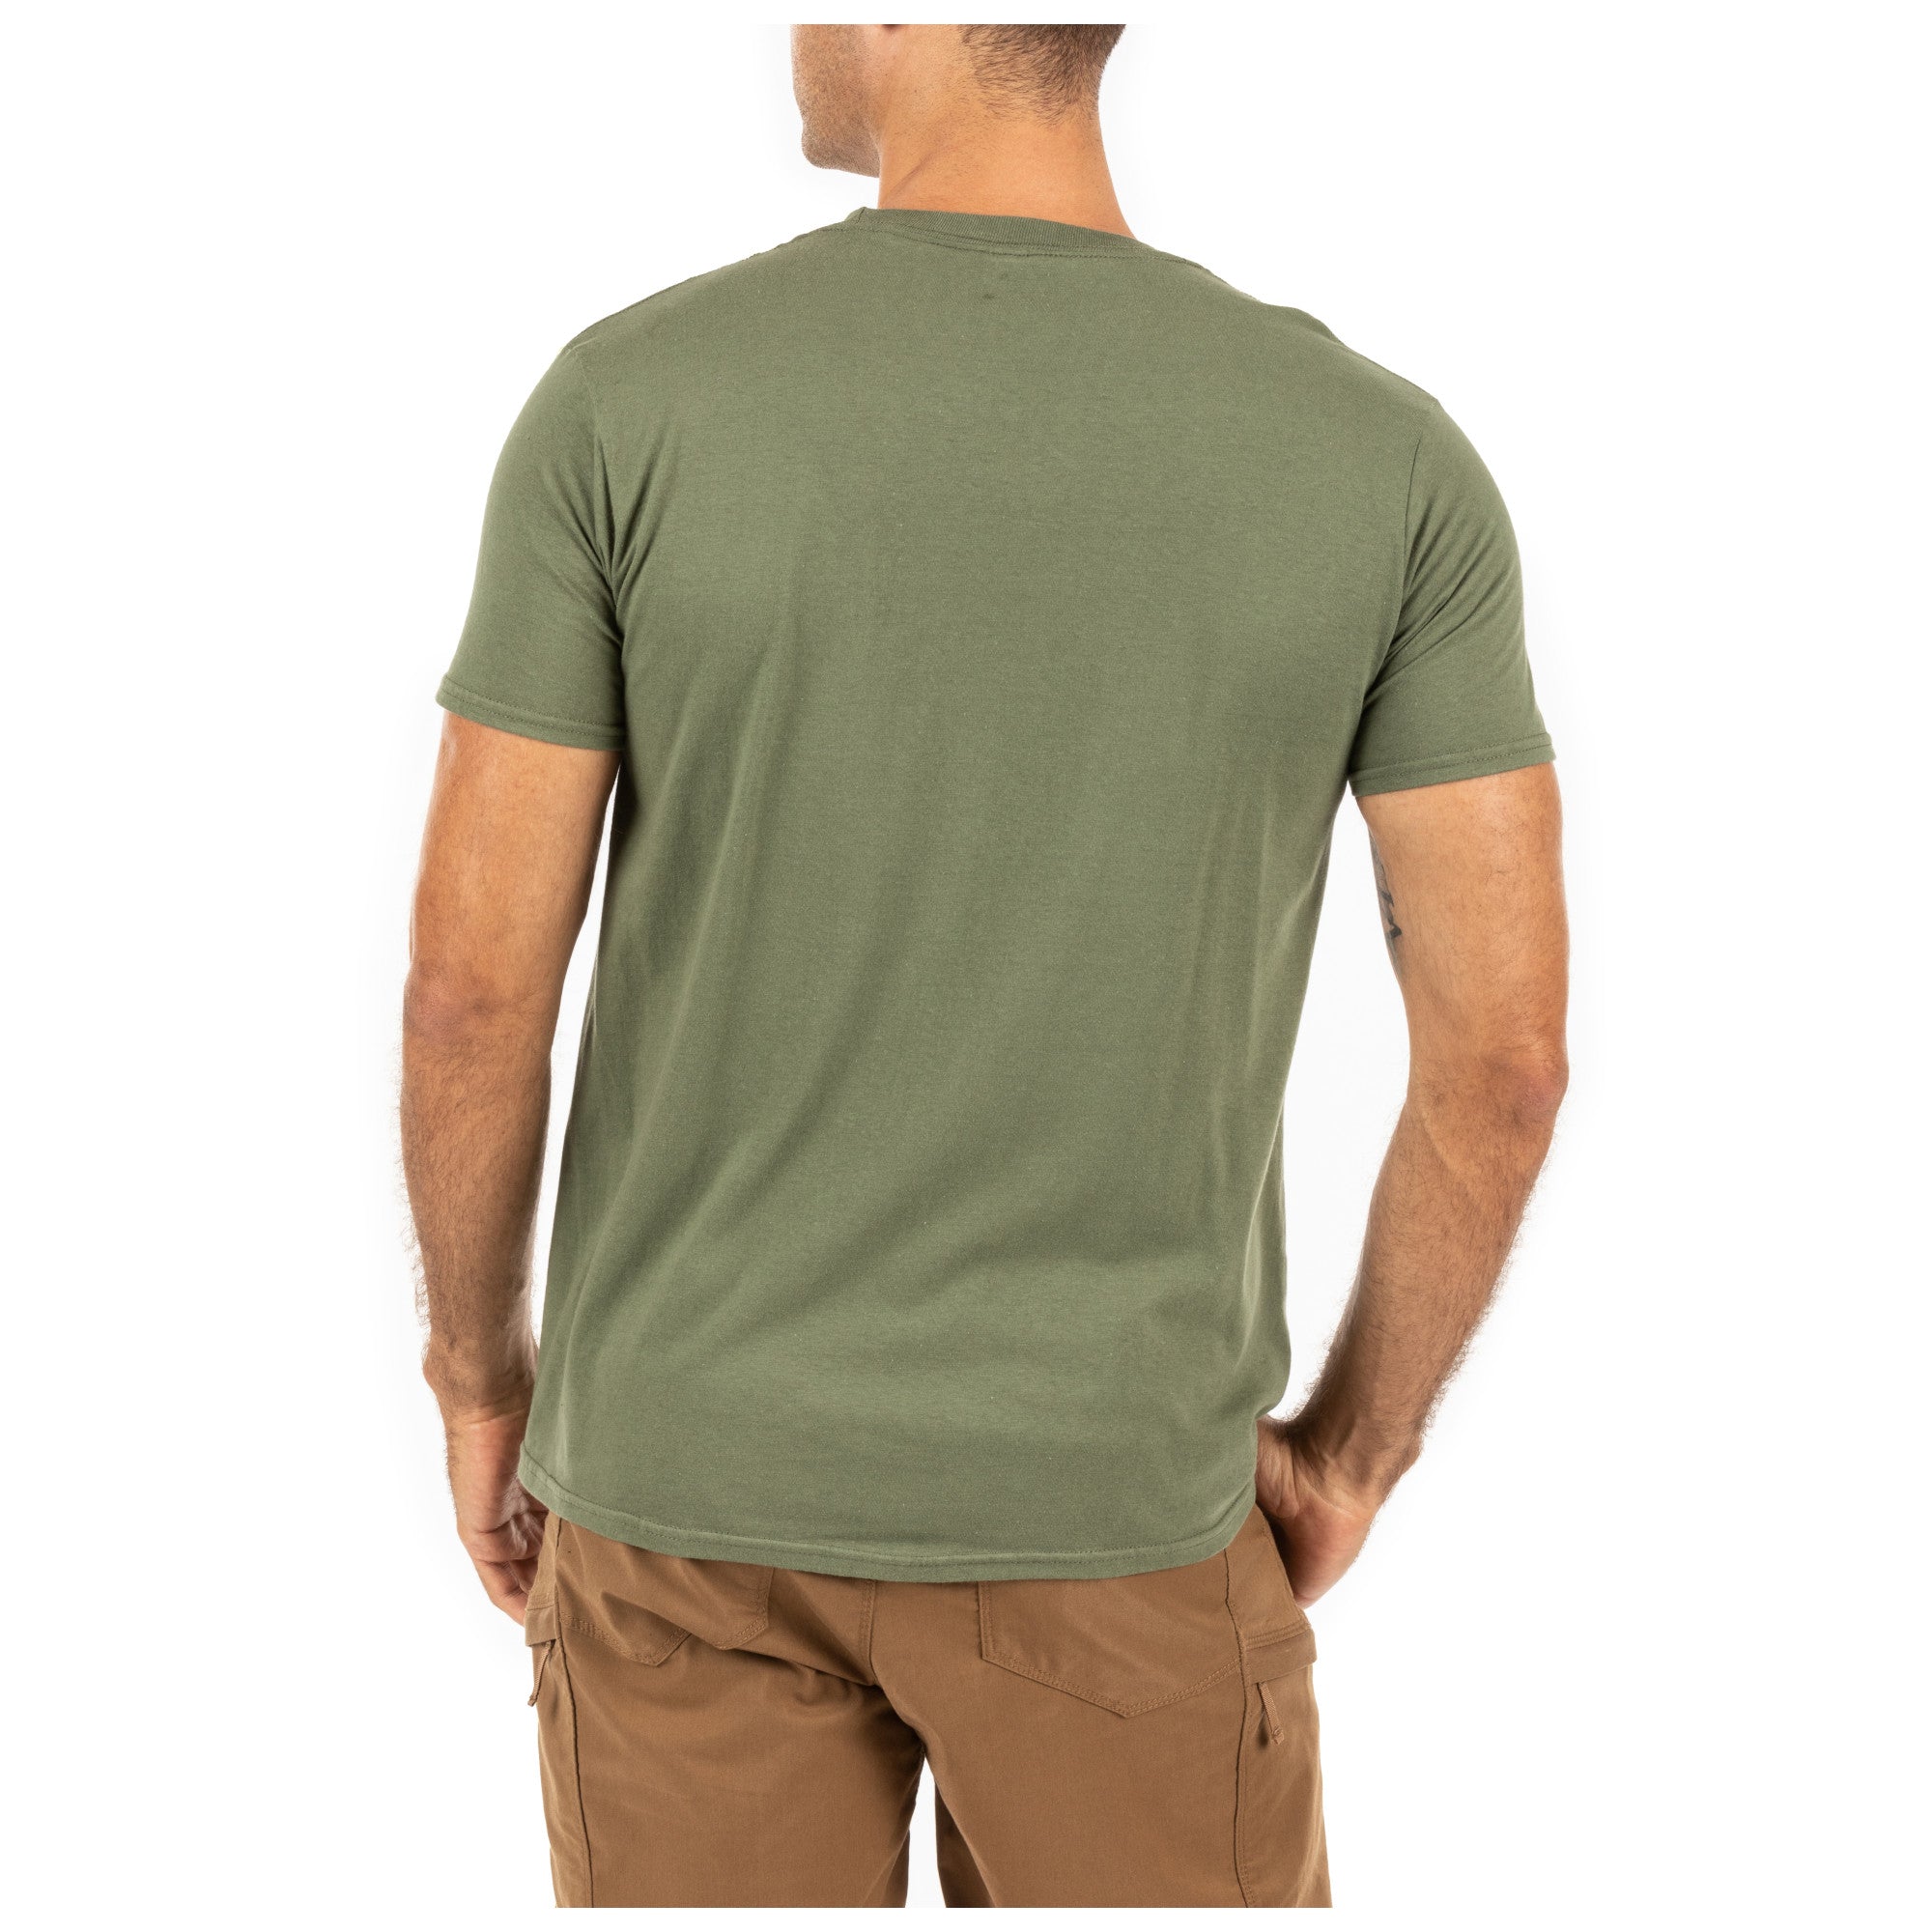 5.11 Tactical Sticks And Stones Tee Military Green Tactical Gear Australia Supplier Distributor Dealer